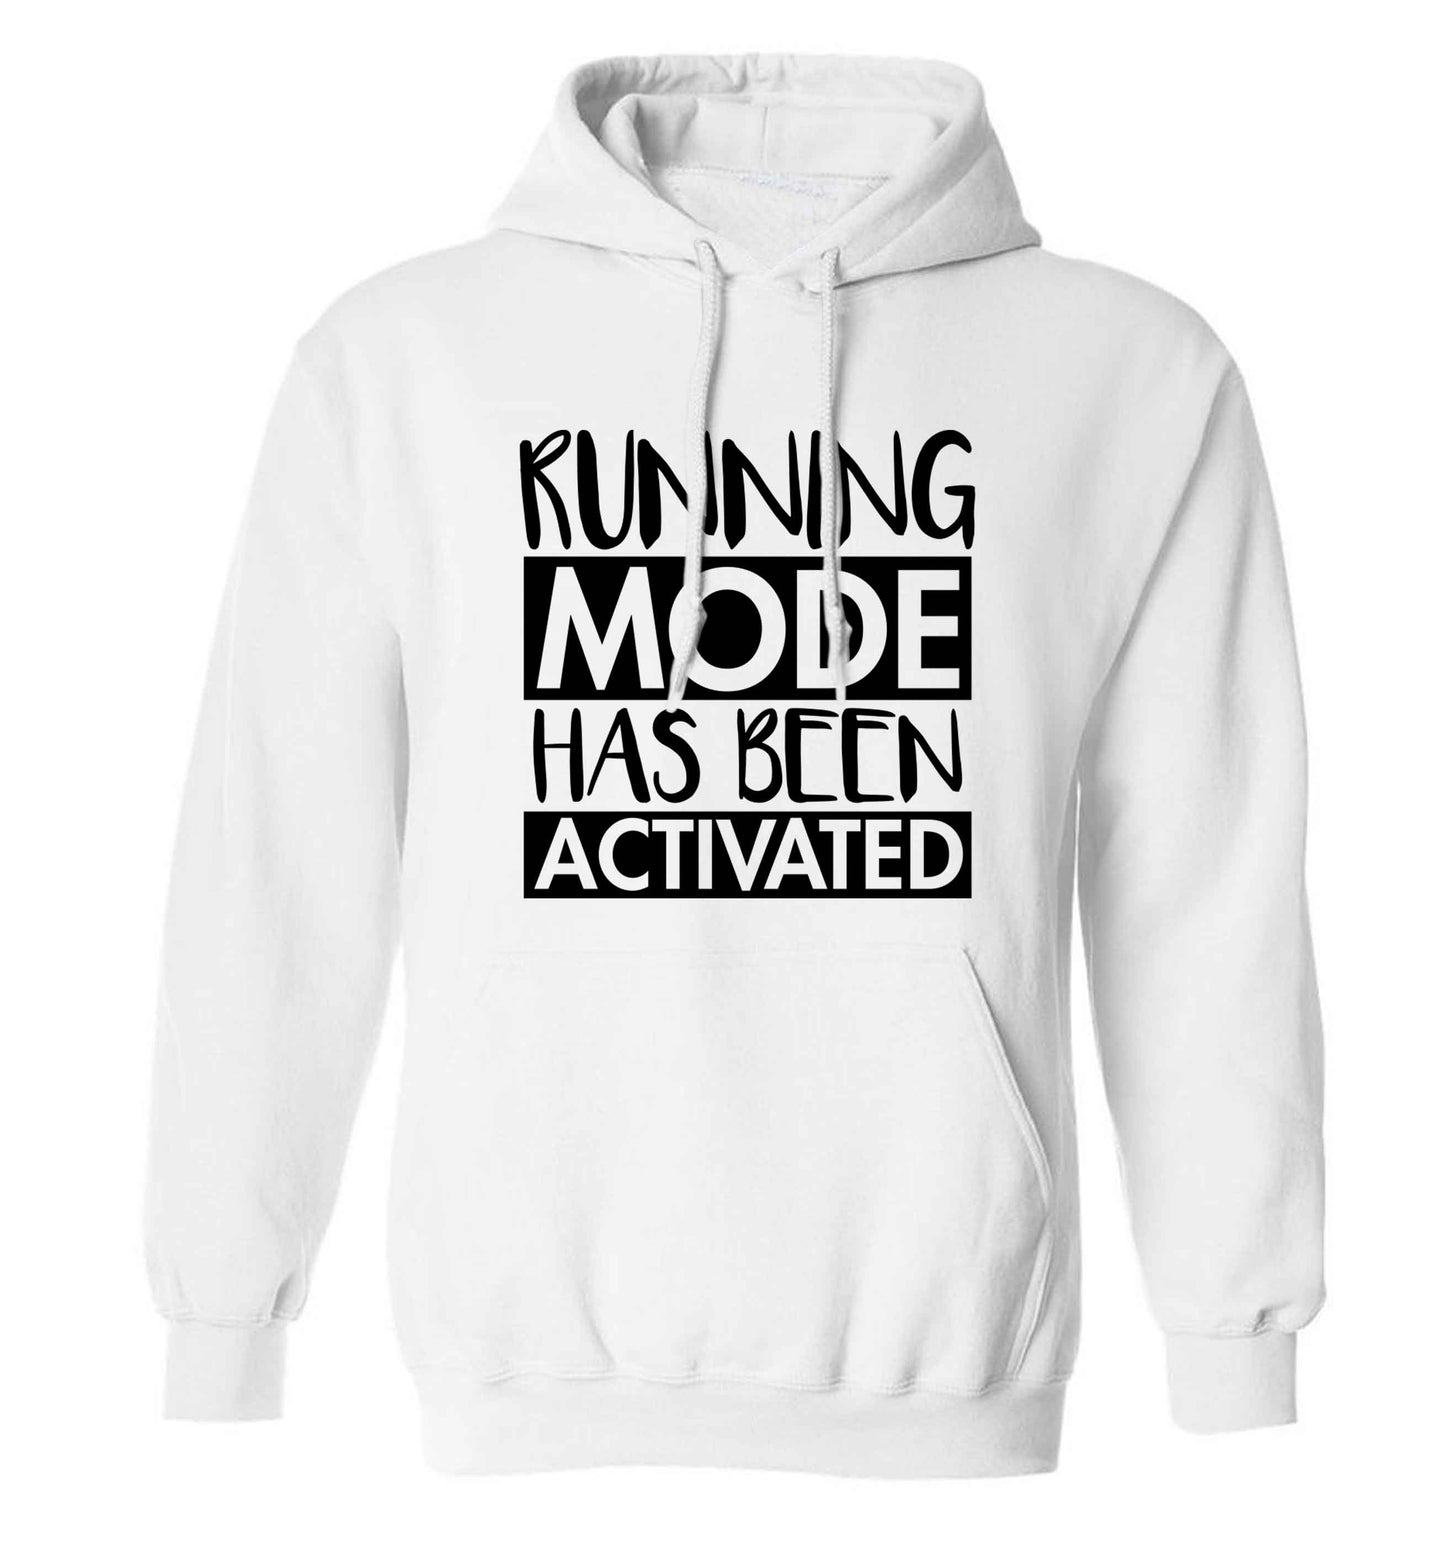 Running mode has been activated adults unisex white hoodie 2XL